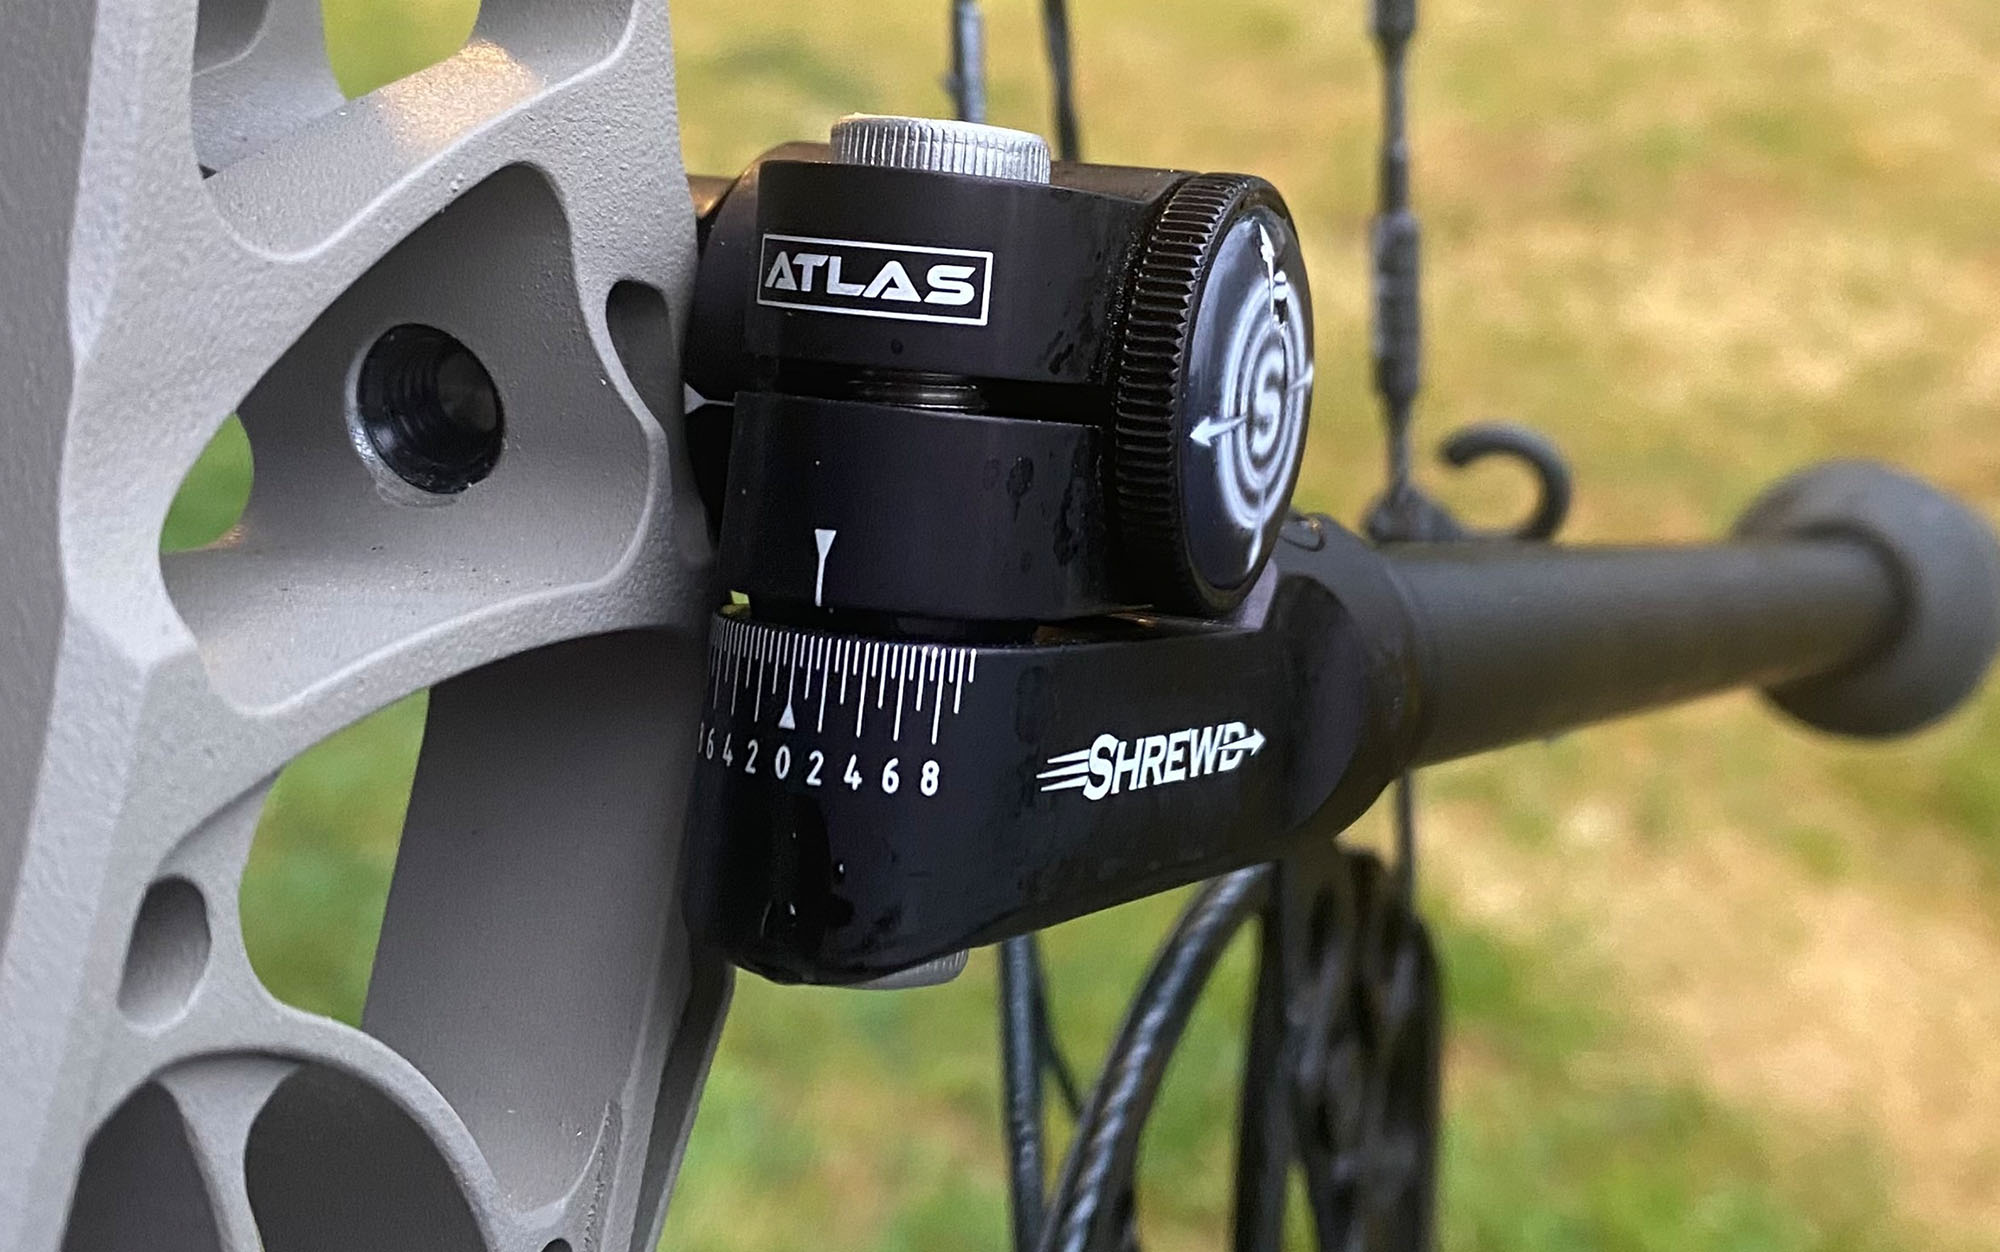 The author tested the Atlas stabilizer.